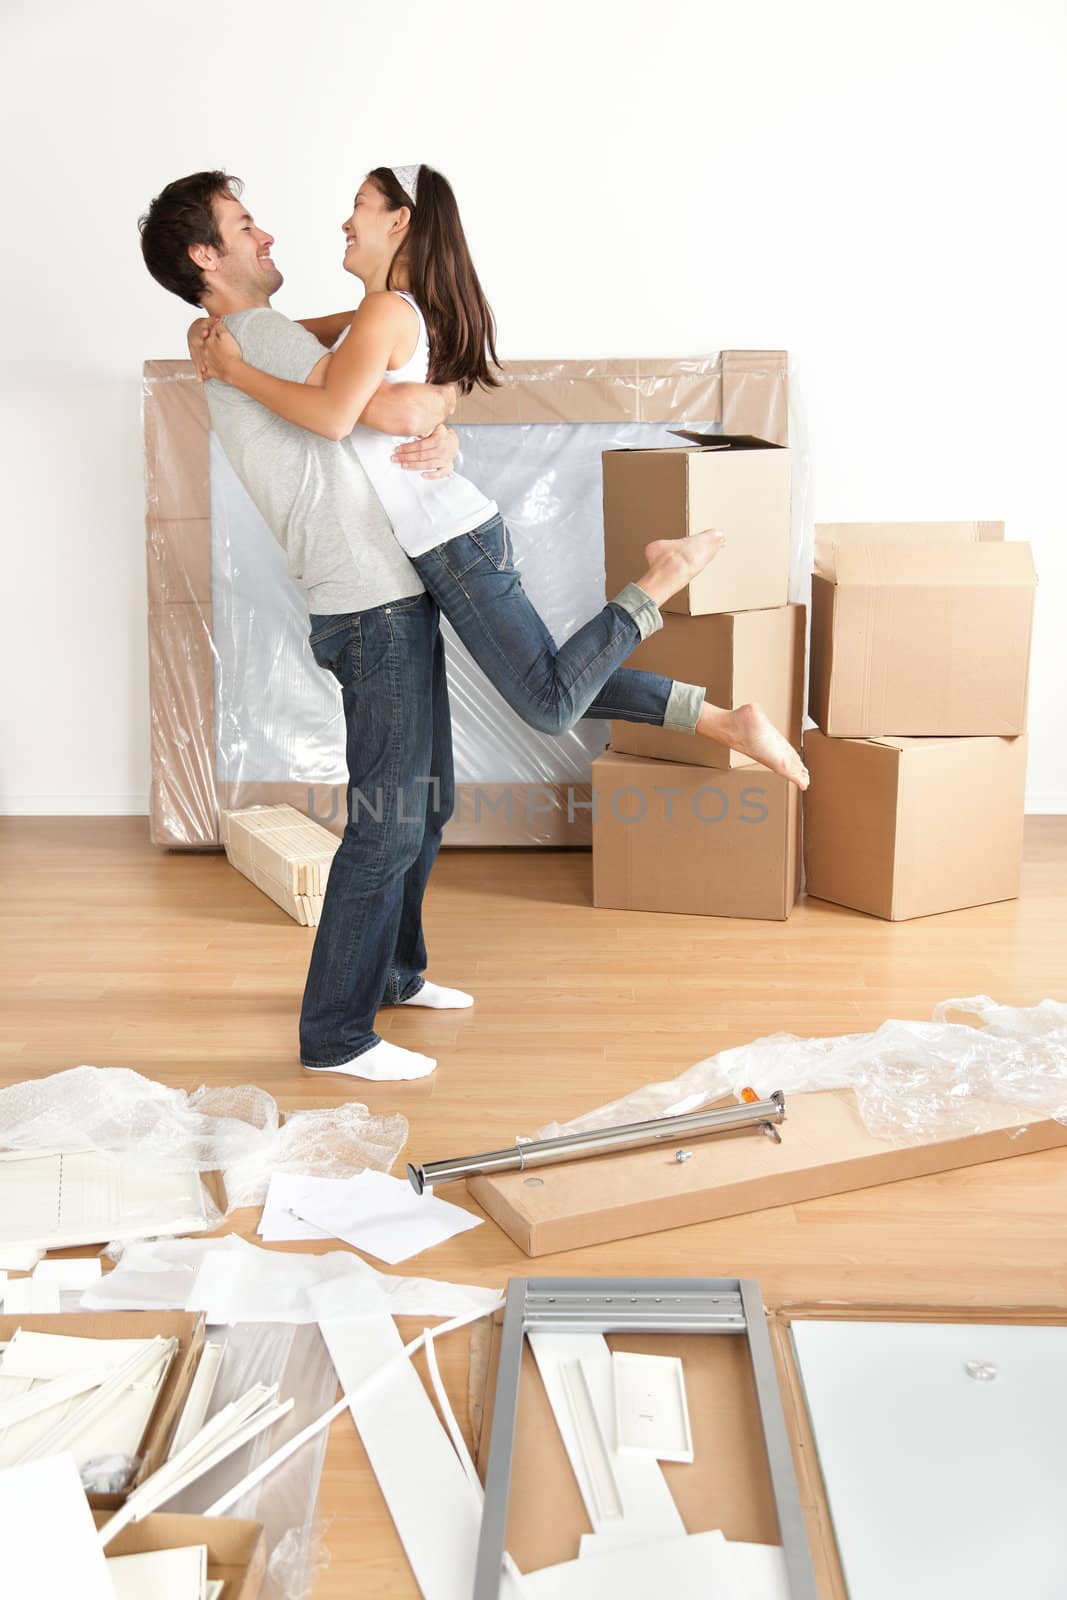 Couple moving in happy and excited in new home. Young interracial couple with moving boxes and furniture assembly in new house or apartment. Caucasian man and Asian woman embracing.